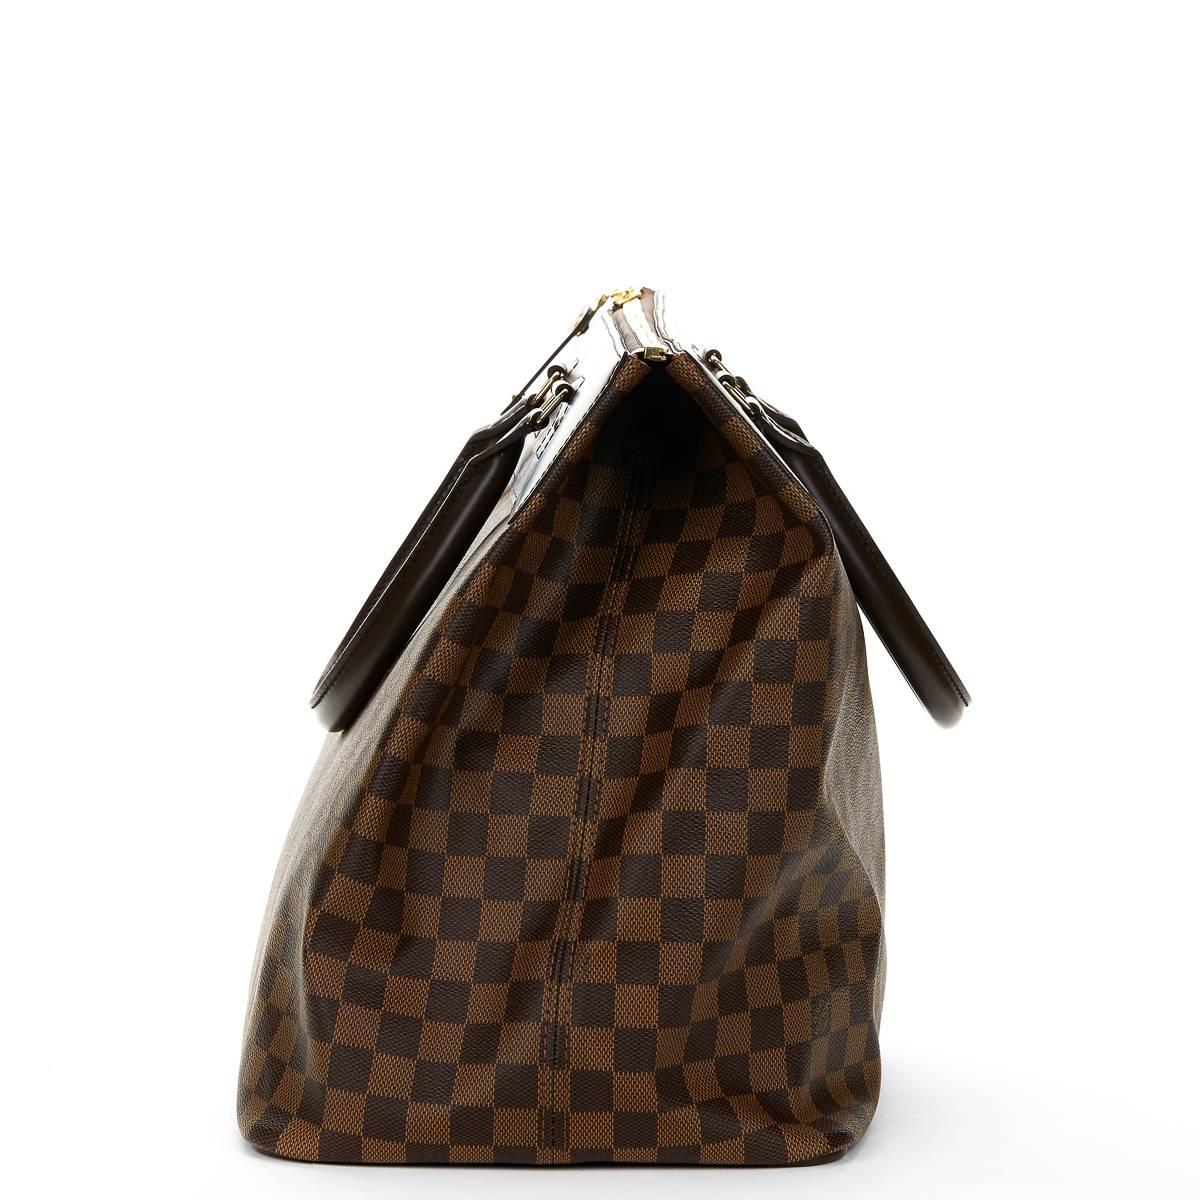 LOUIS VUITTON
Brown Damier Ebene Coated Canvas Greenwich PM

This LOUIS VUITTON Greenwich PM is in Excellent Pre-Owned Condition accompanied by Louis Vuitton Dust Bag, Padlock, Key. Circa 2005. Primarily made from Coated Canvas complimented by